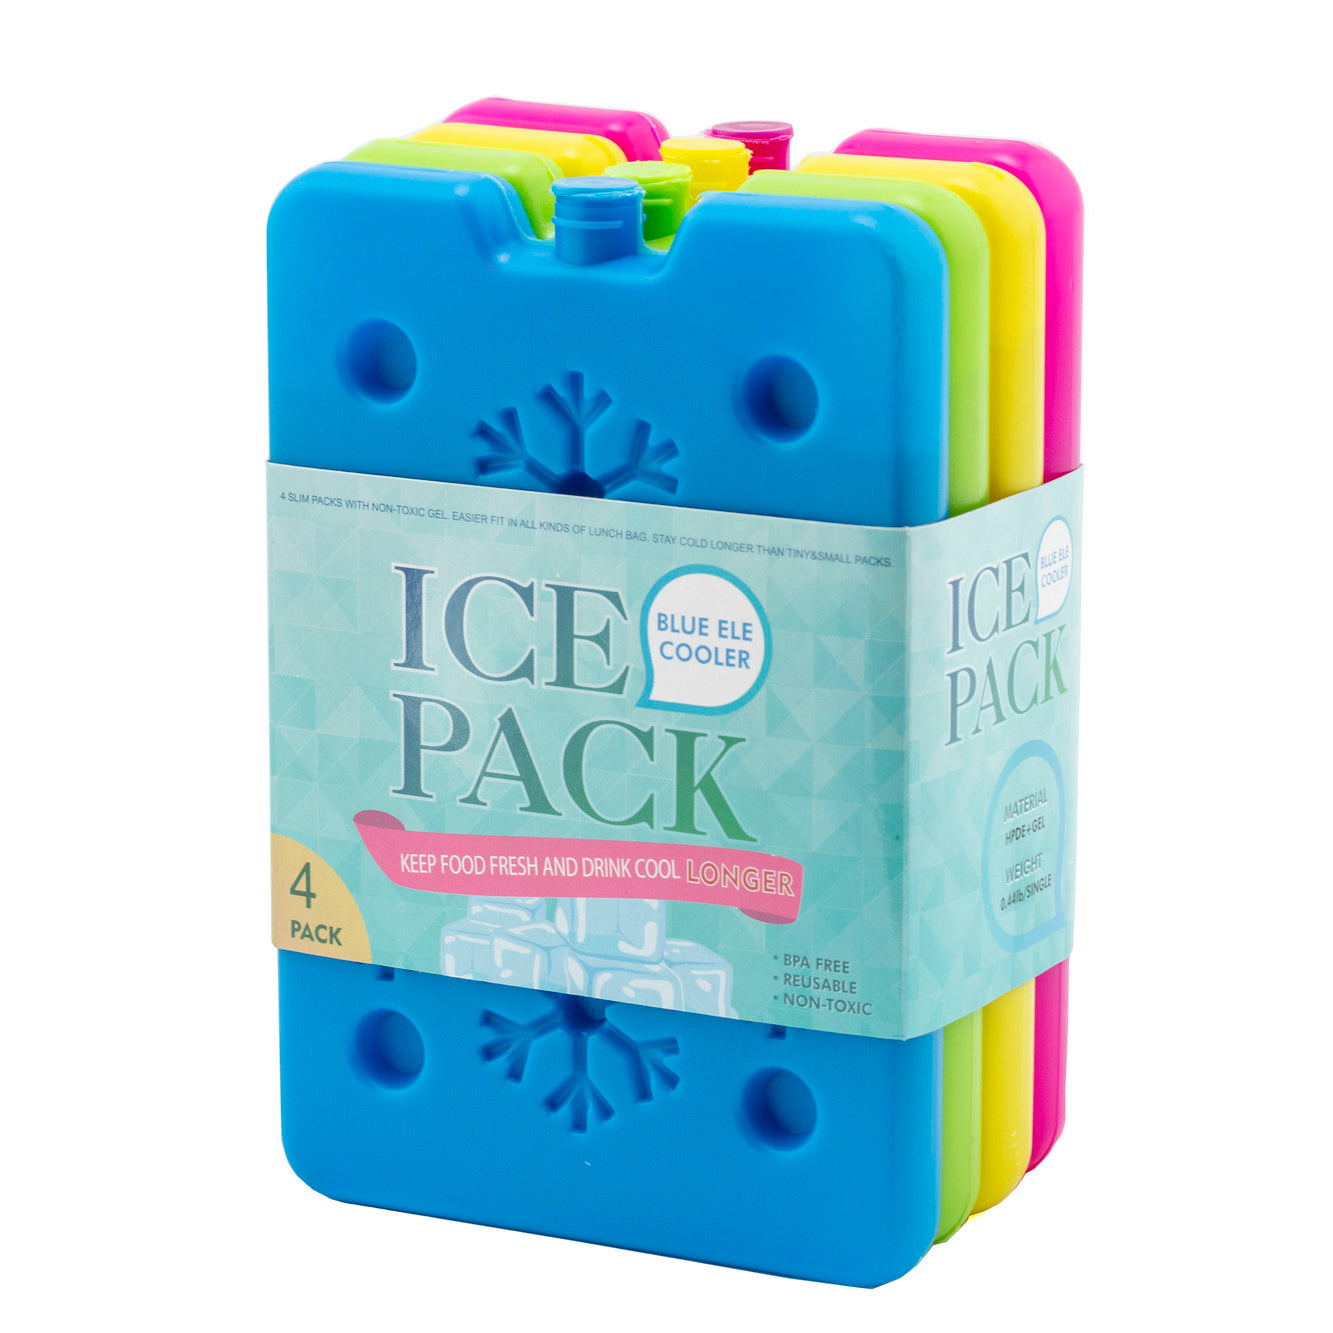 Do I Need an Ice Pack In My Kids Lunch Box